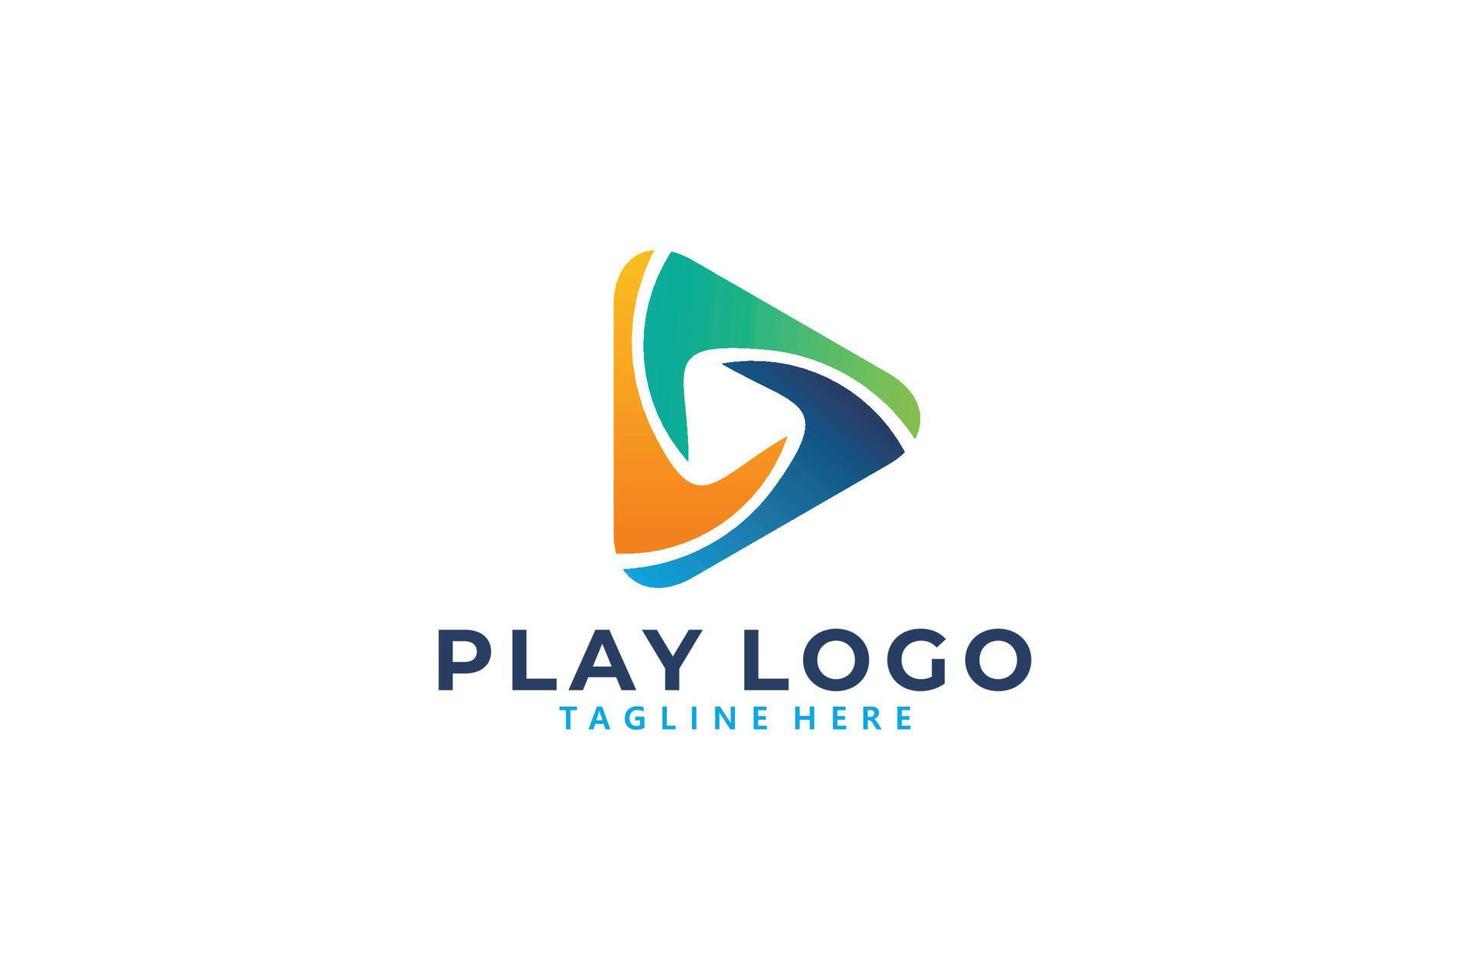 play logo icon vector isolated